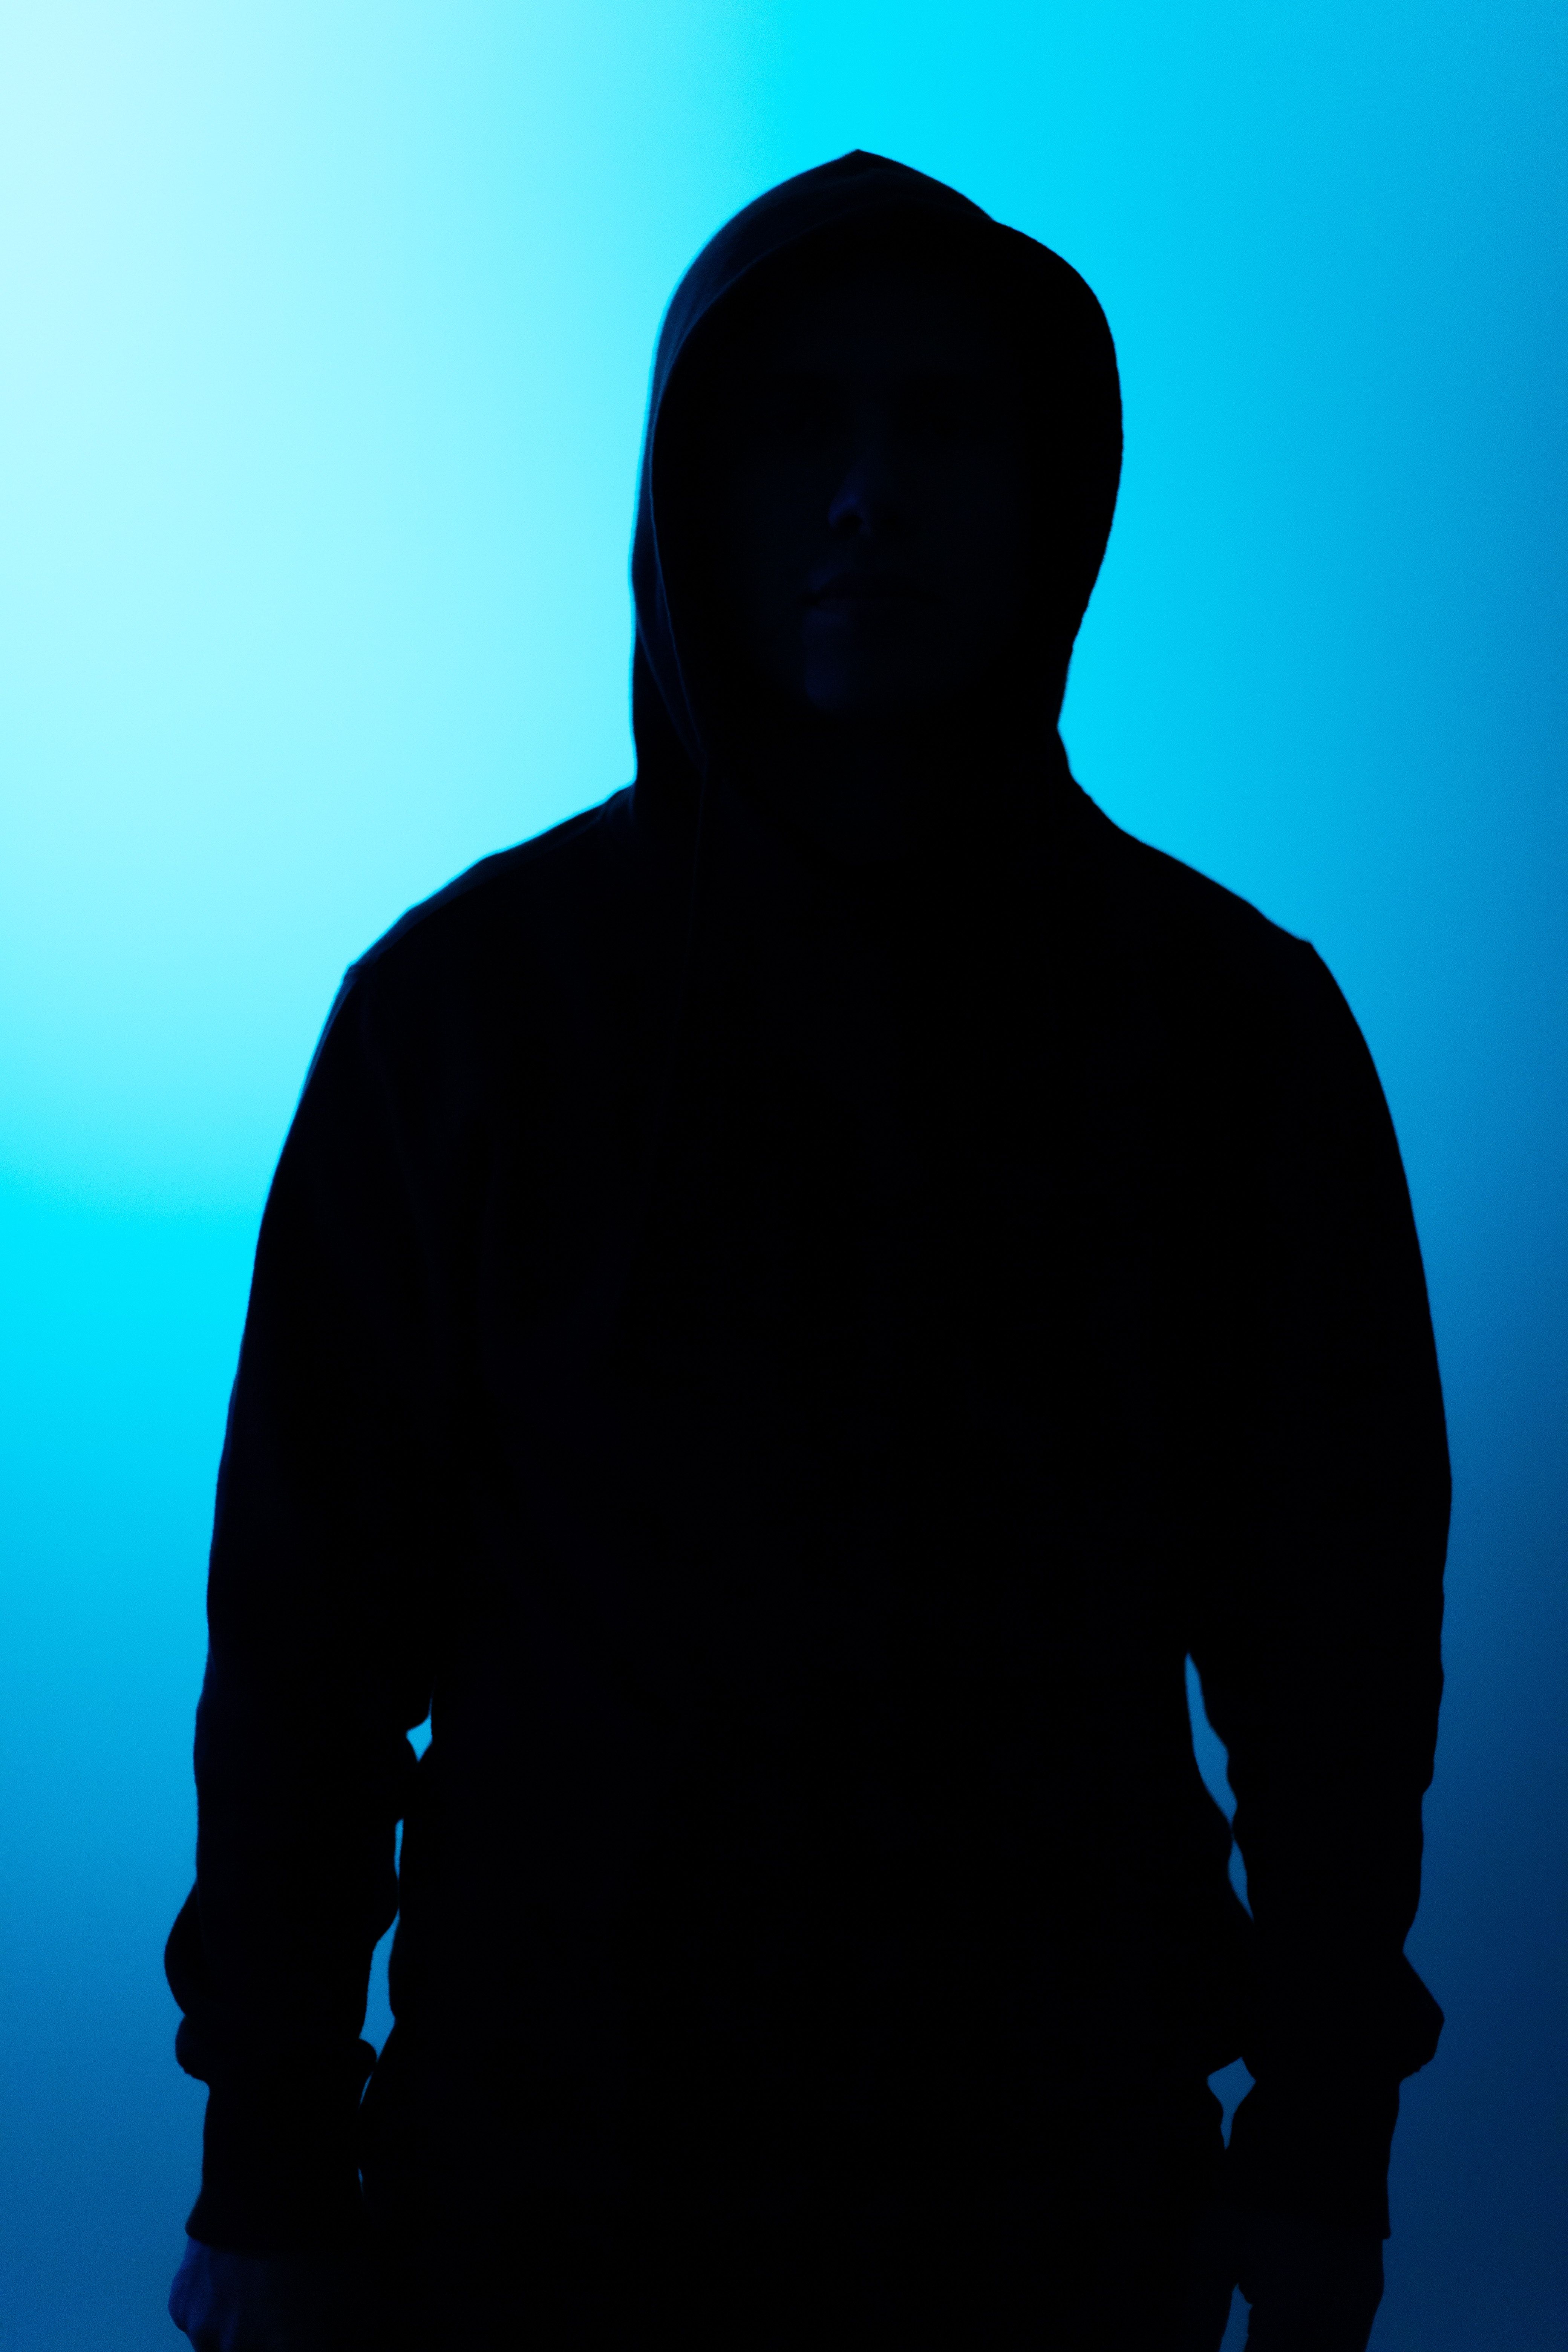 A man standing in front of blue light - Sad, creepy